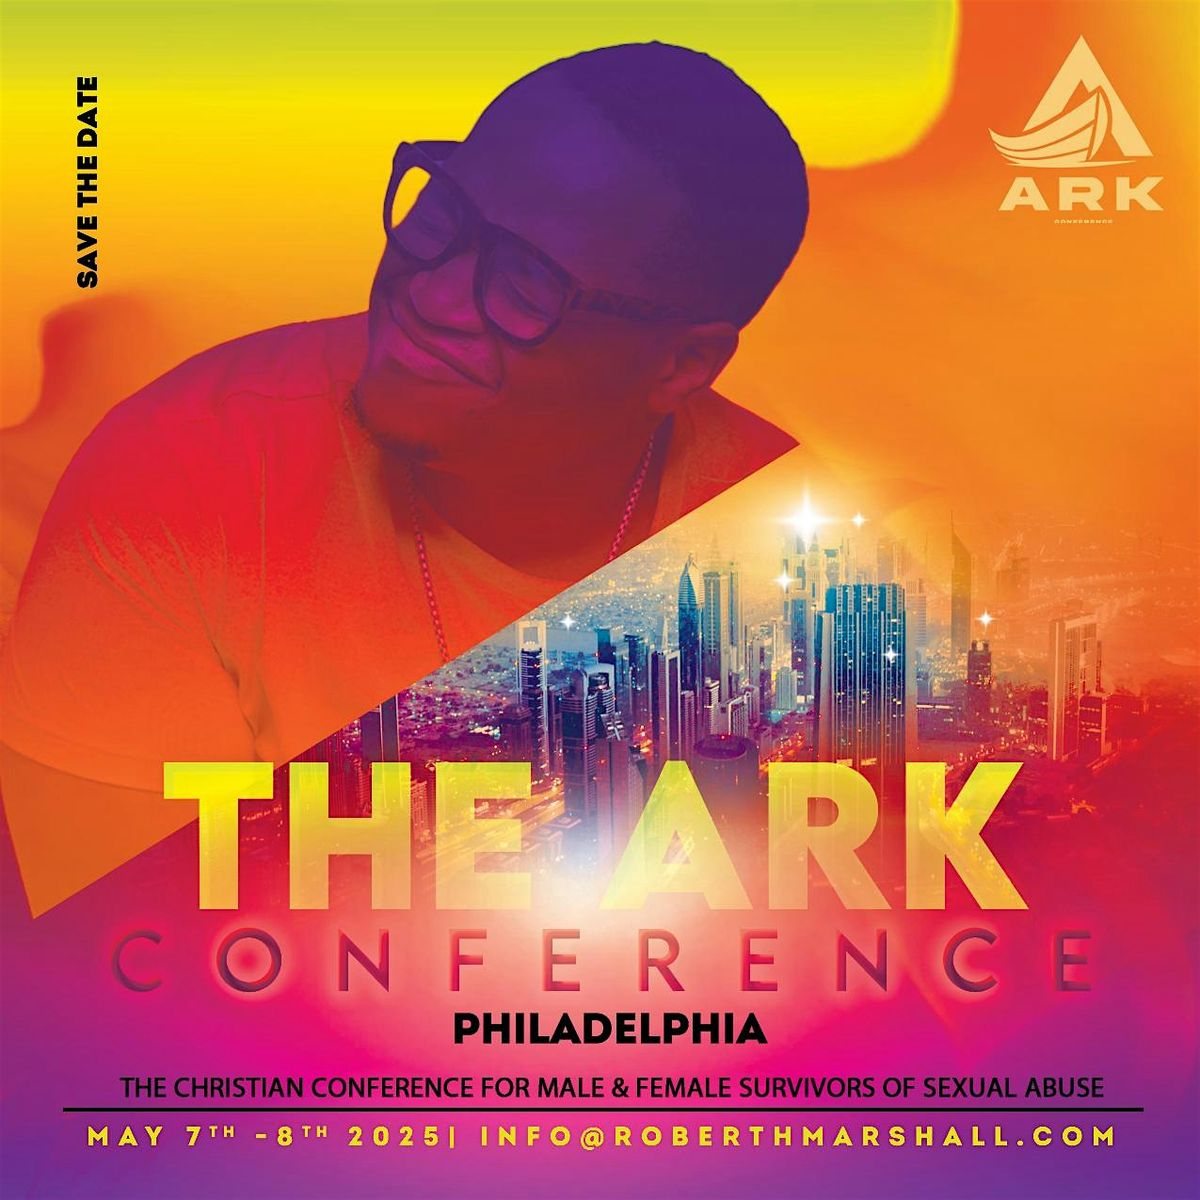 The ARK Conference